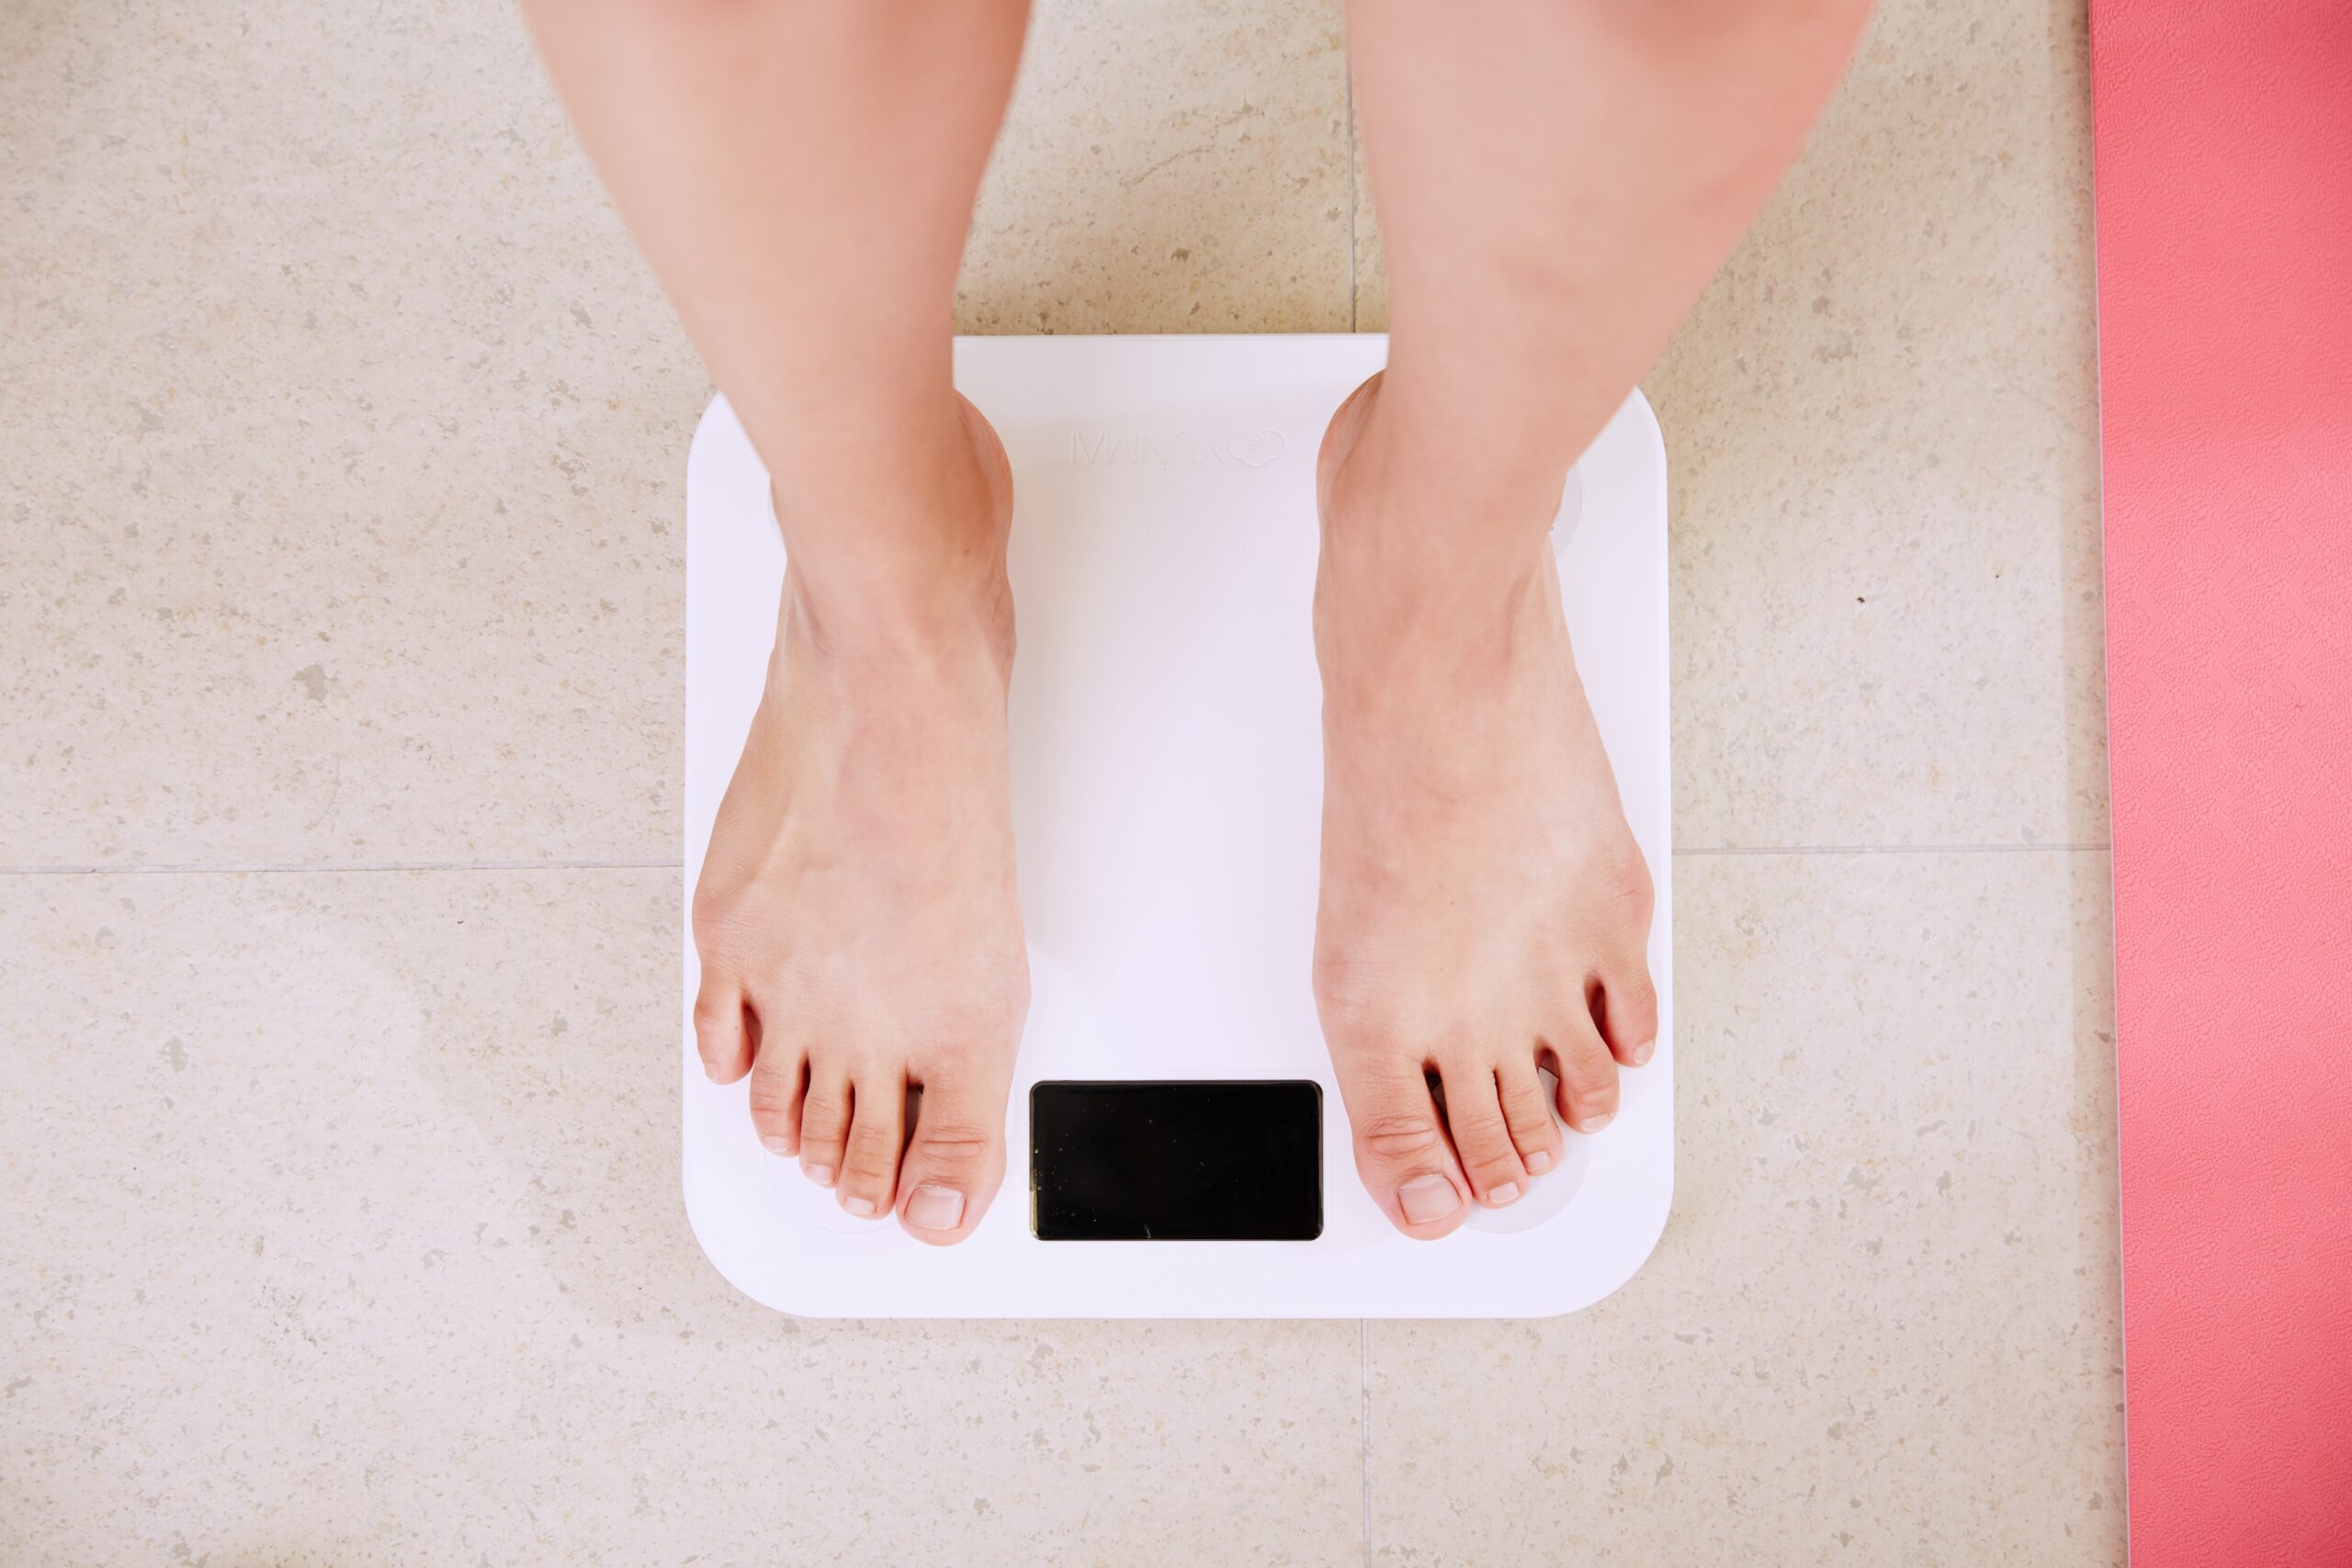 Person standing on digital scales